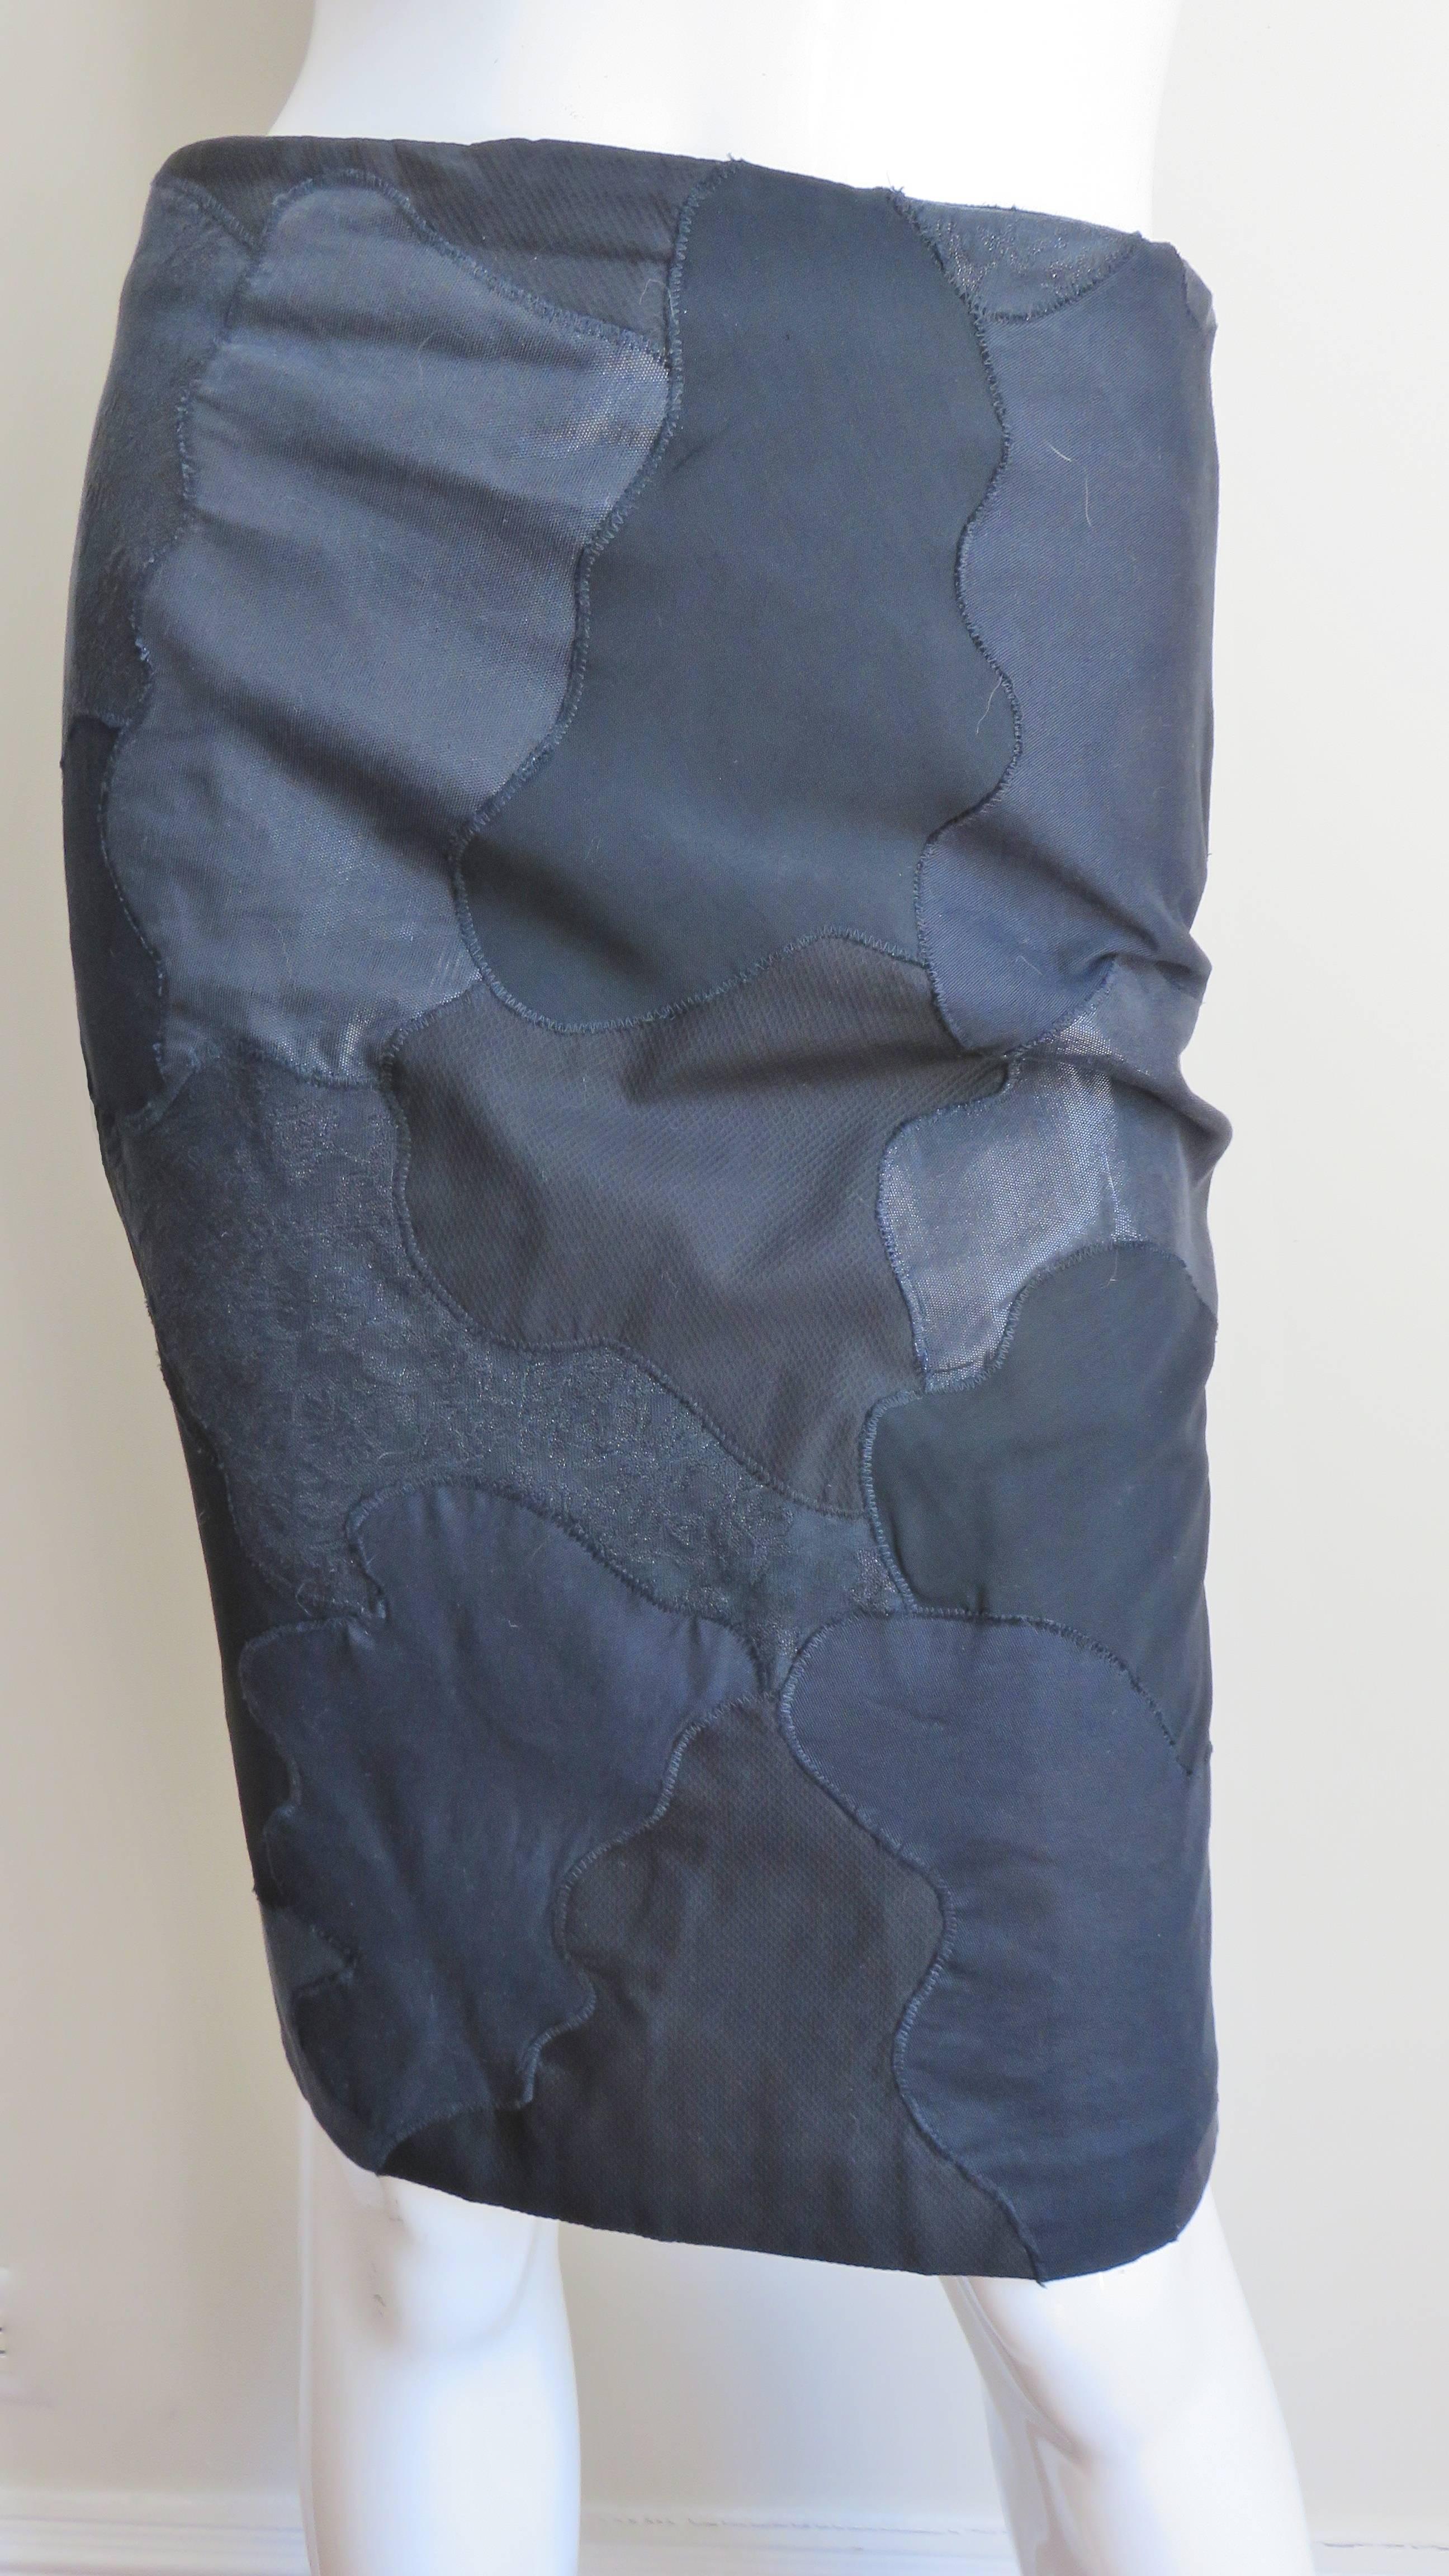 A fabulous black silk and cotton skirt in a patchwork in varying shapes from Alexander McQueen. It is pencil style with a back kick pleat, back zipper and it is lined in black silk.  
Appears unworn.  Fits size Small, Medium. Marked US size